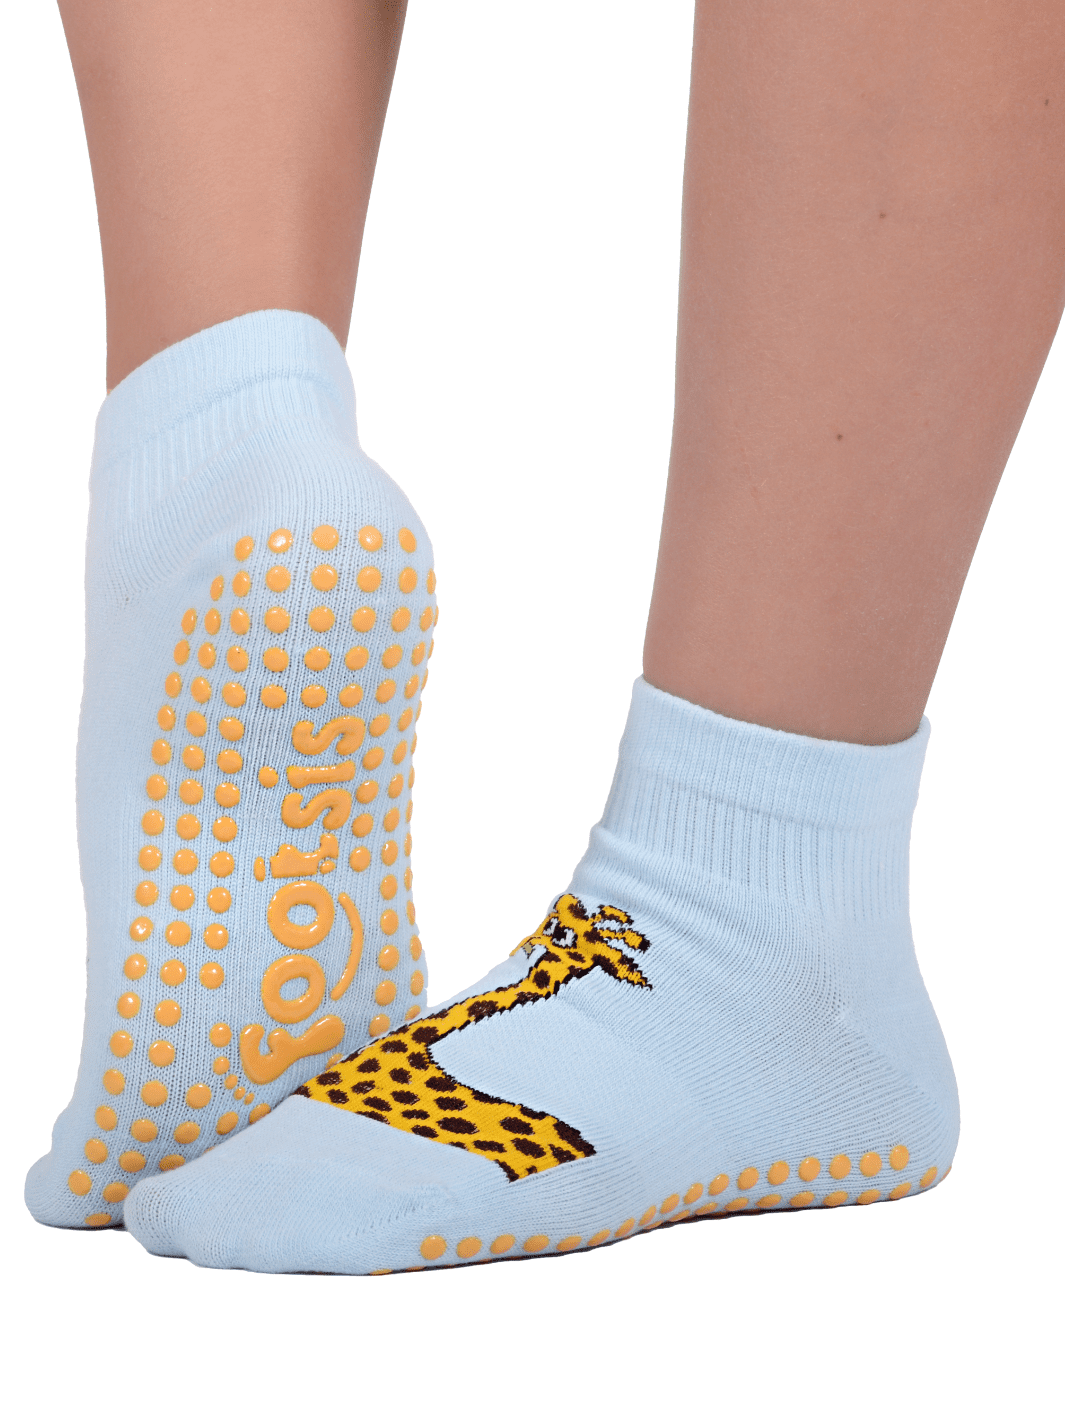 GRiPPiES The No-slip Solution for Socks, Tights and Gloves - Mom